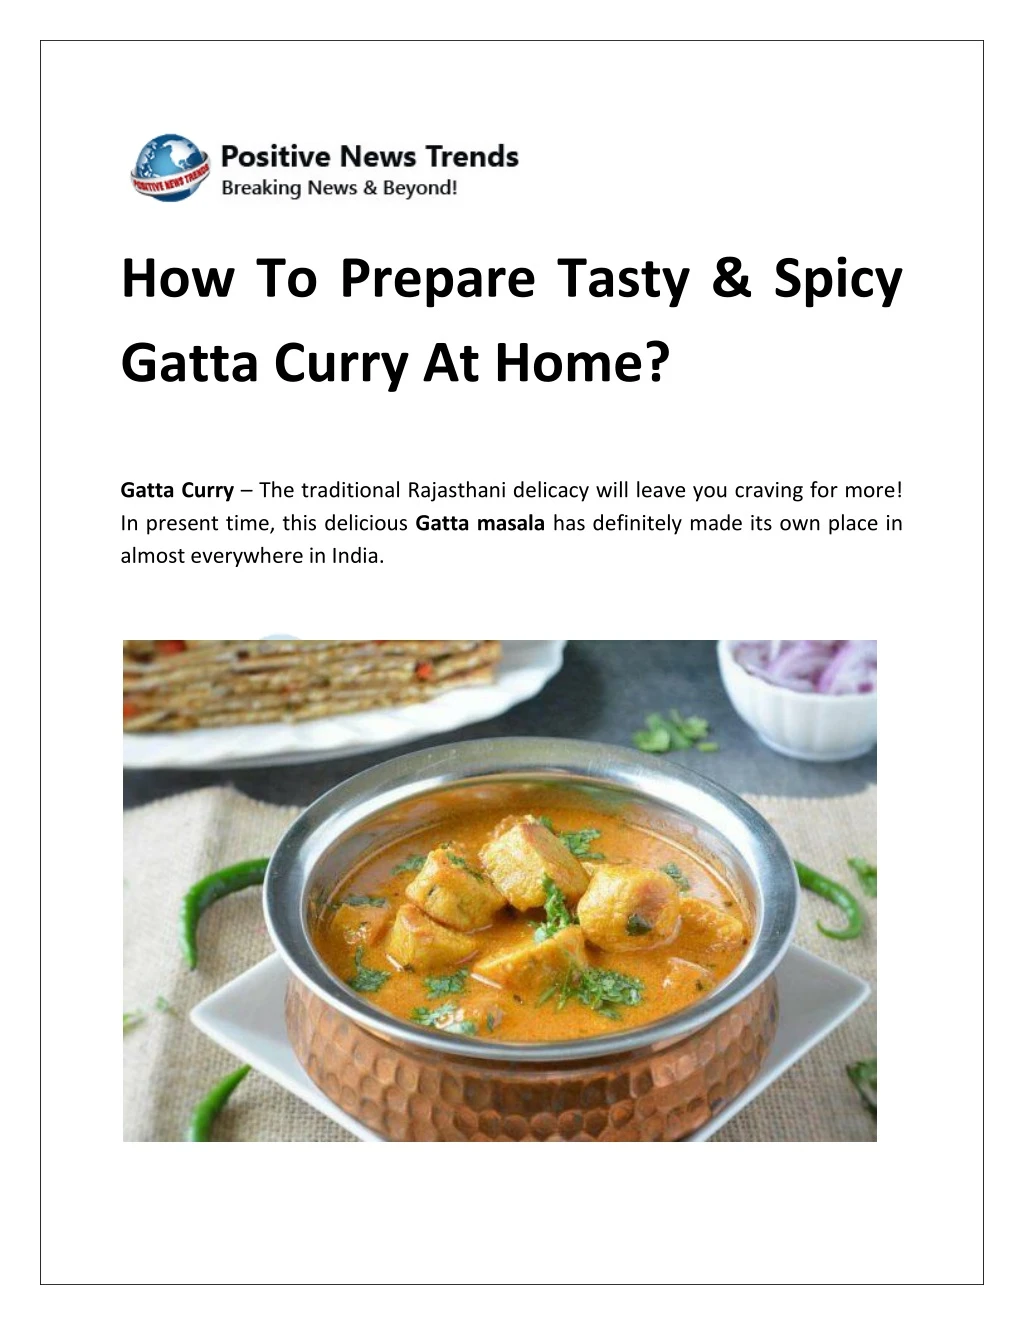 how to prepare tasty spicy gatta curry at home